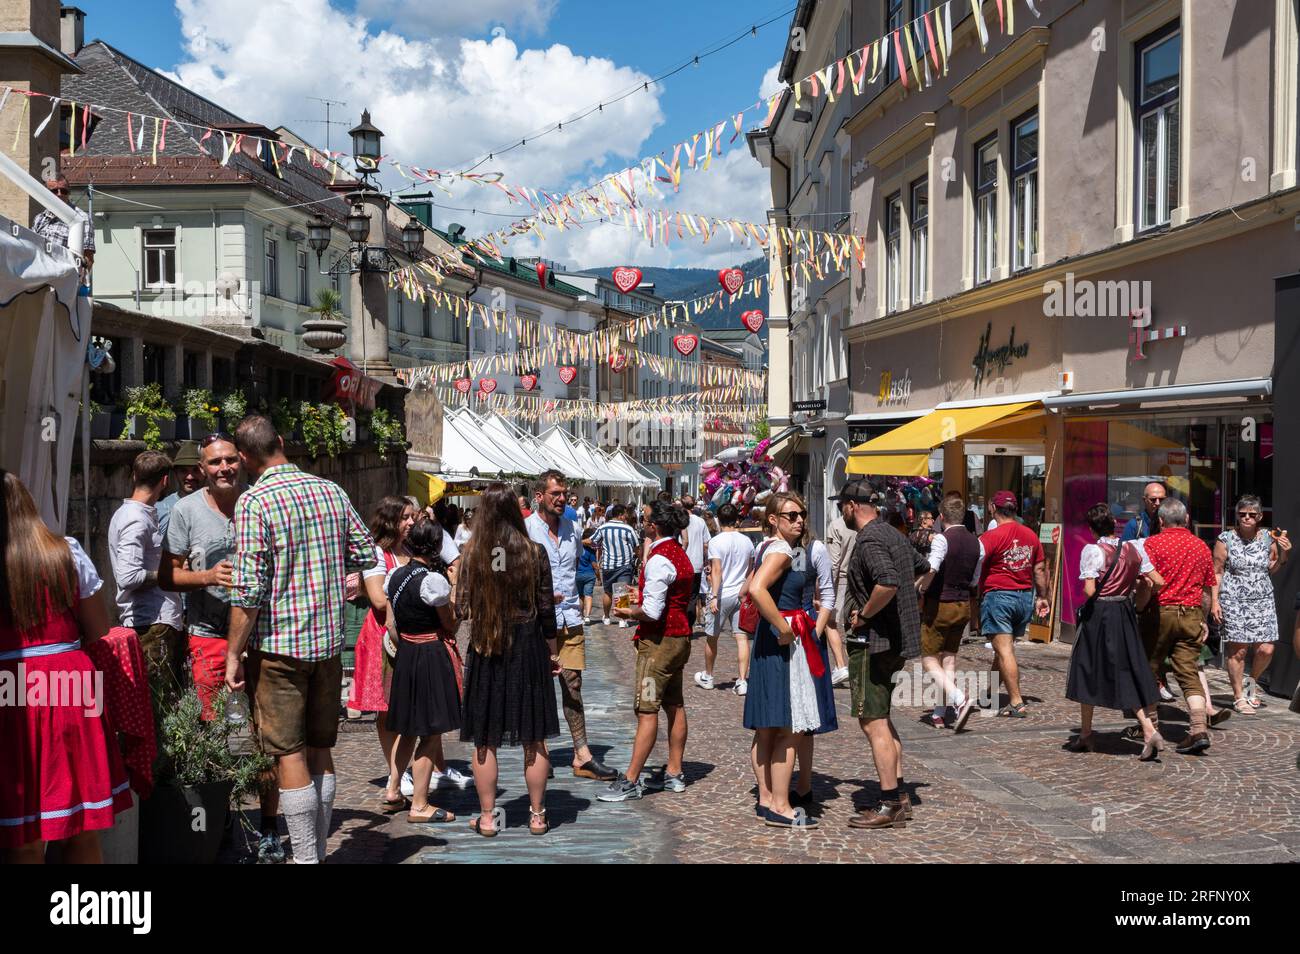 Villach, Austria (31st July 2023) - The central main street crowded and decorated for the local feast 'Villacher kirchtag' Stock Photo